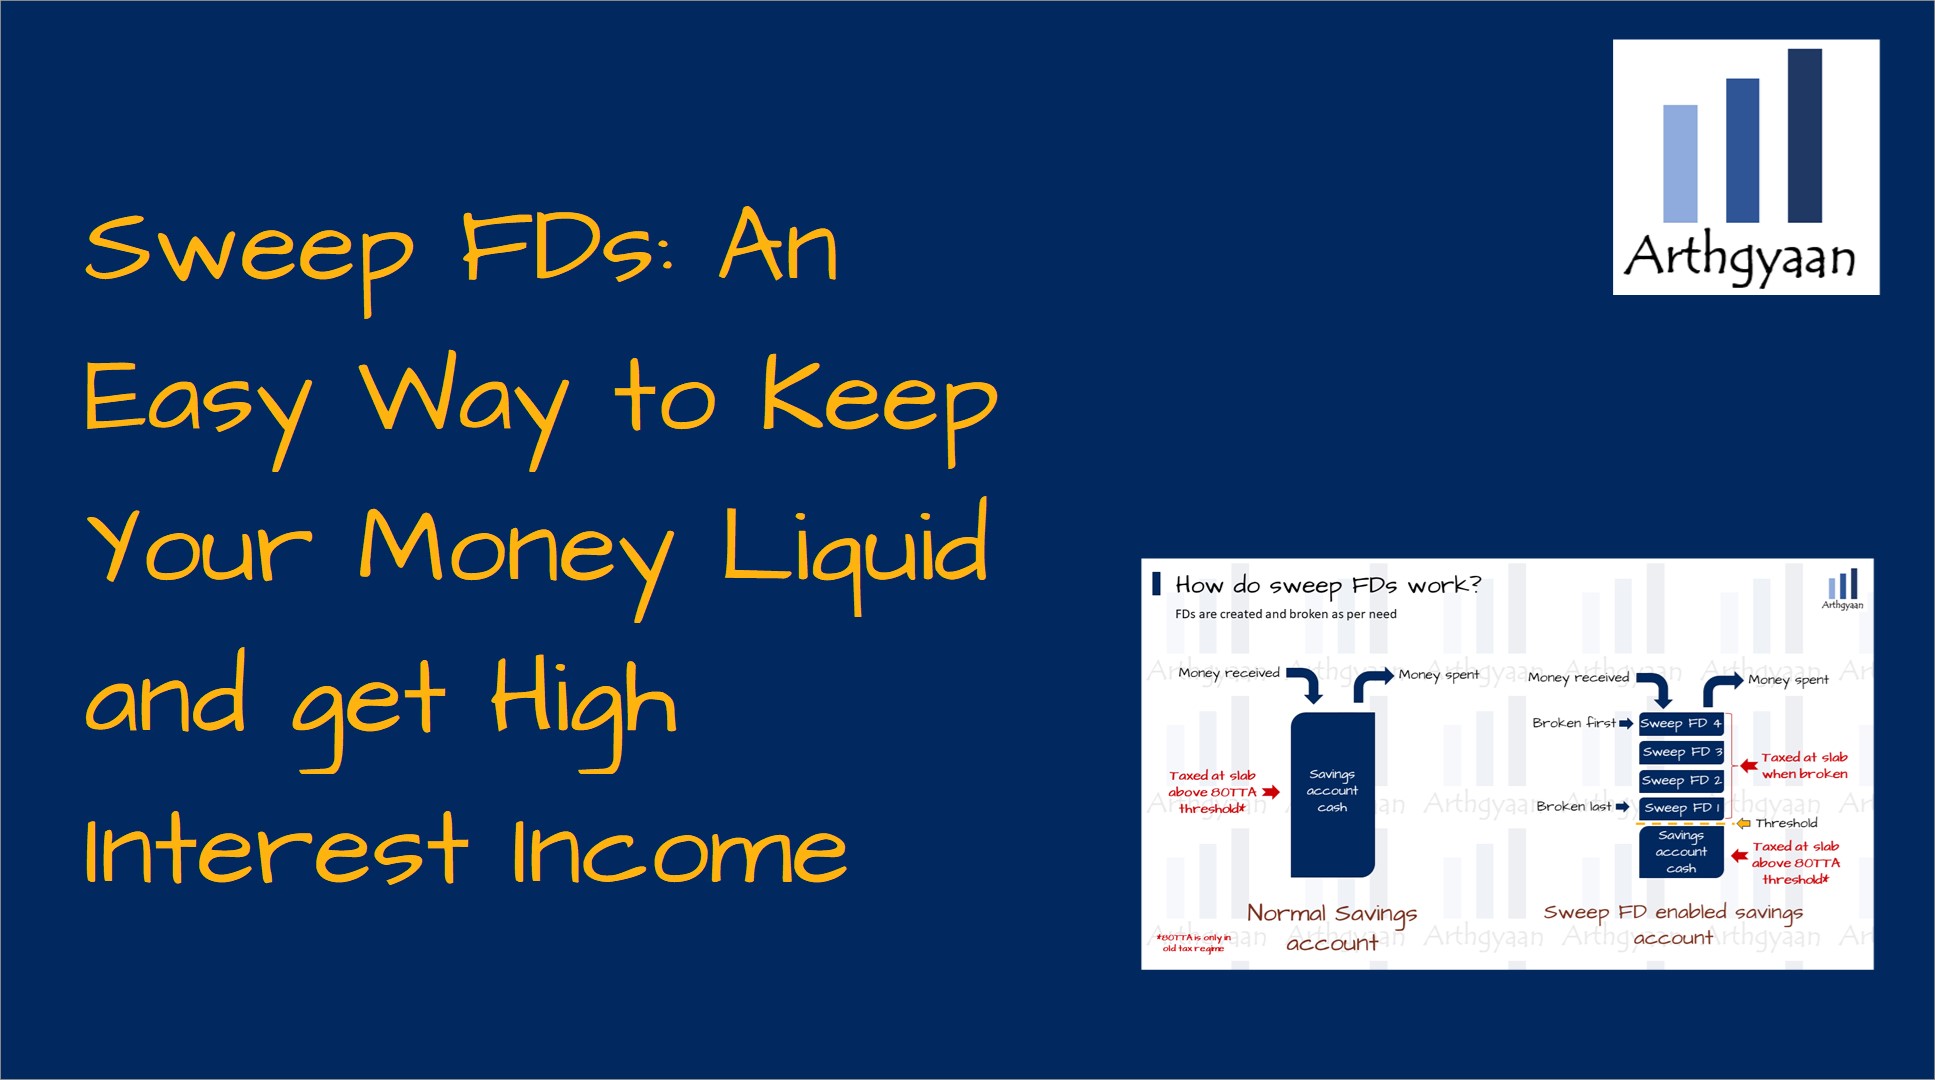 Sweep FDs: An Easy Way to Keep Your Money Liquid and get High Interest Income